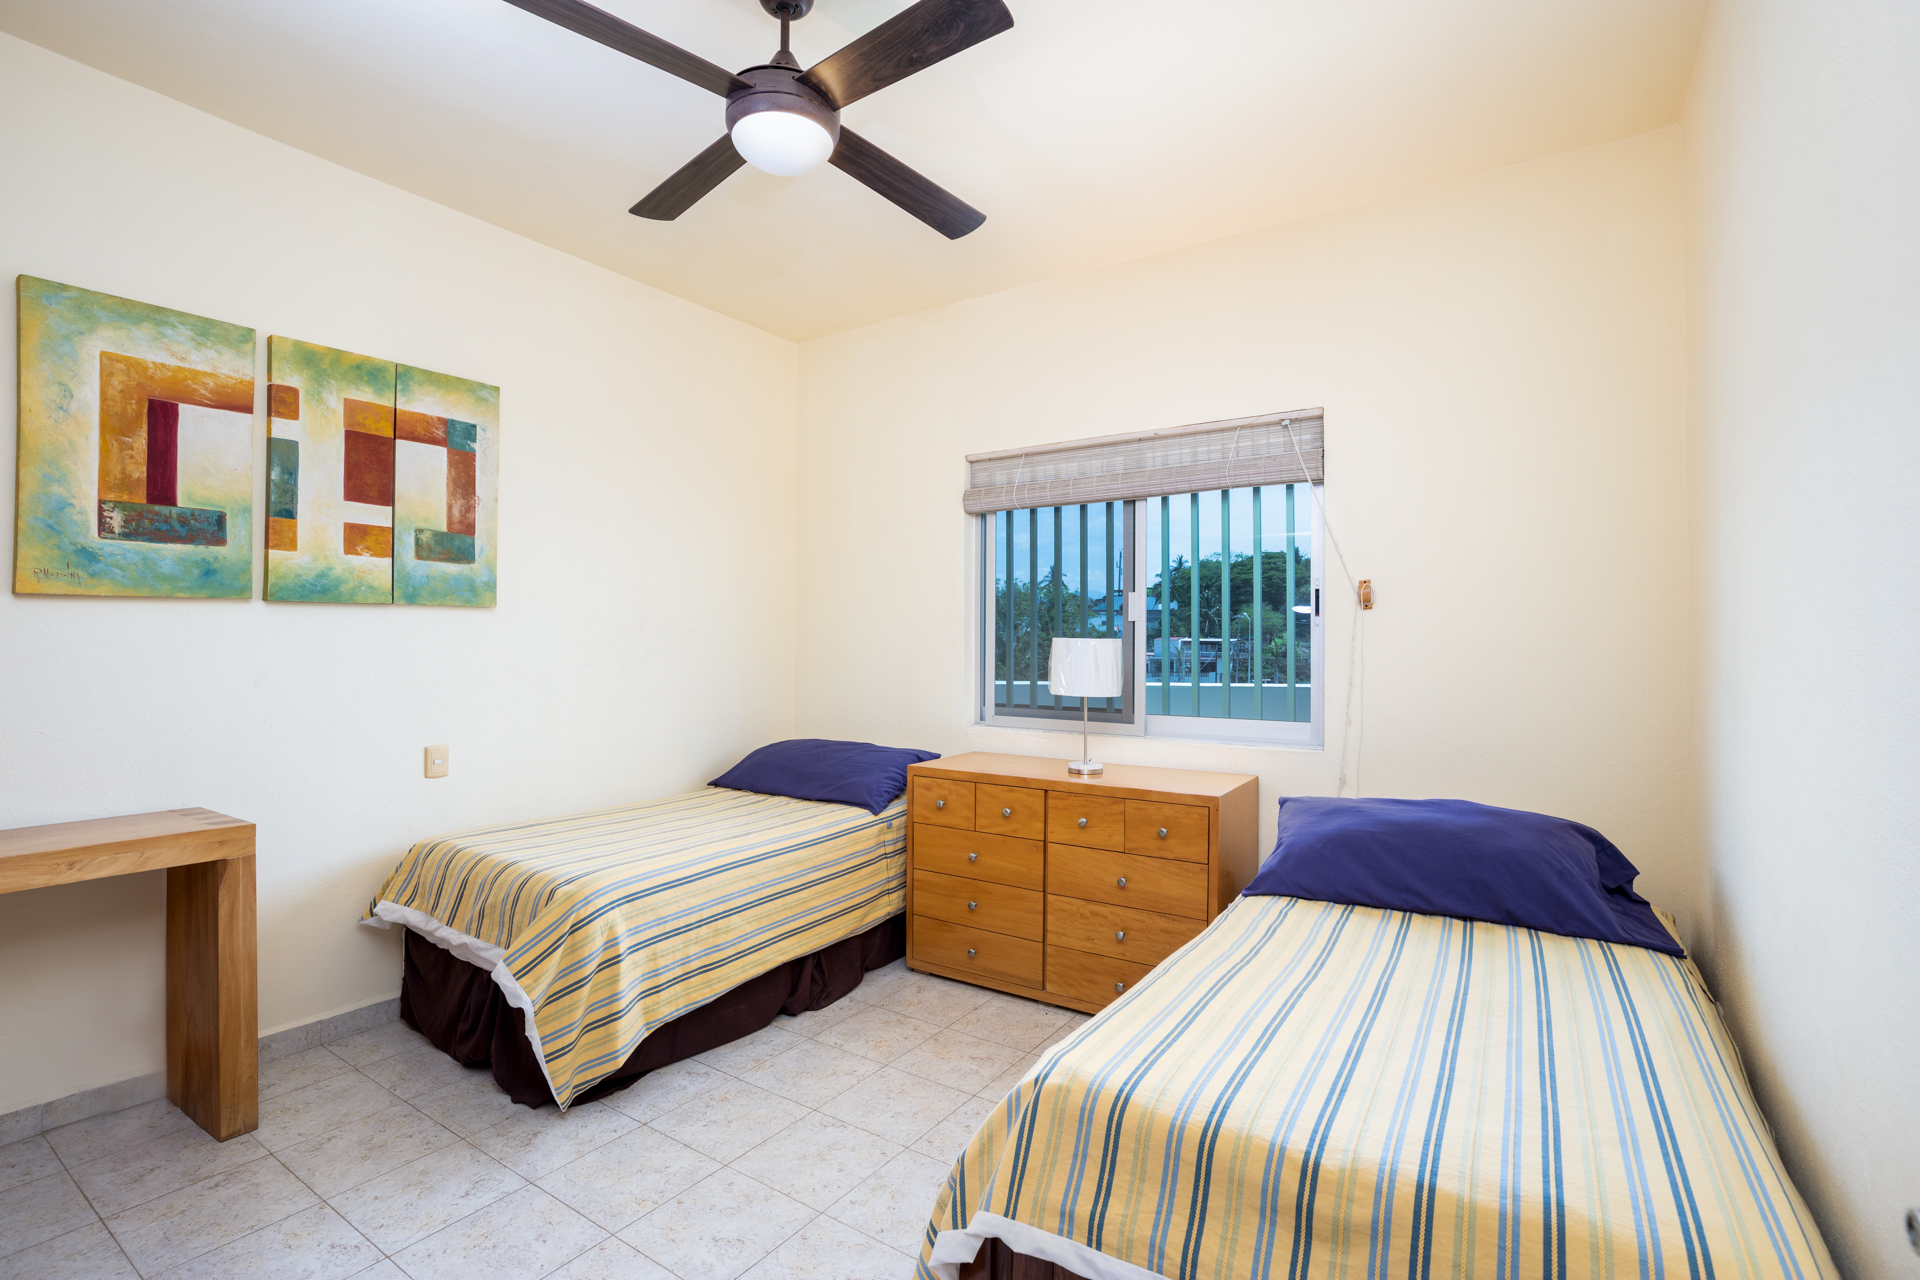 Guest room equipped with two single beds .